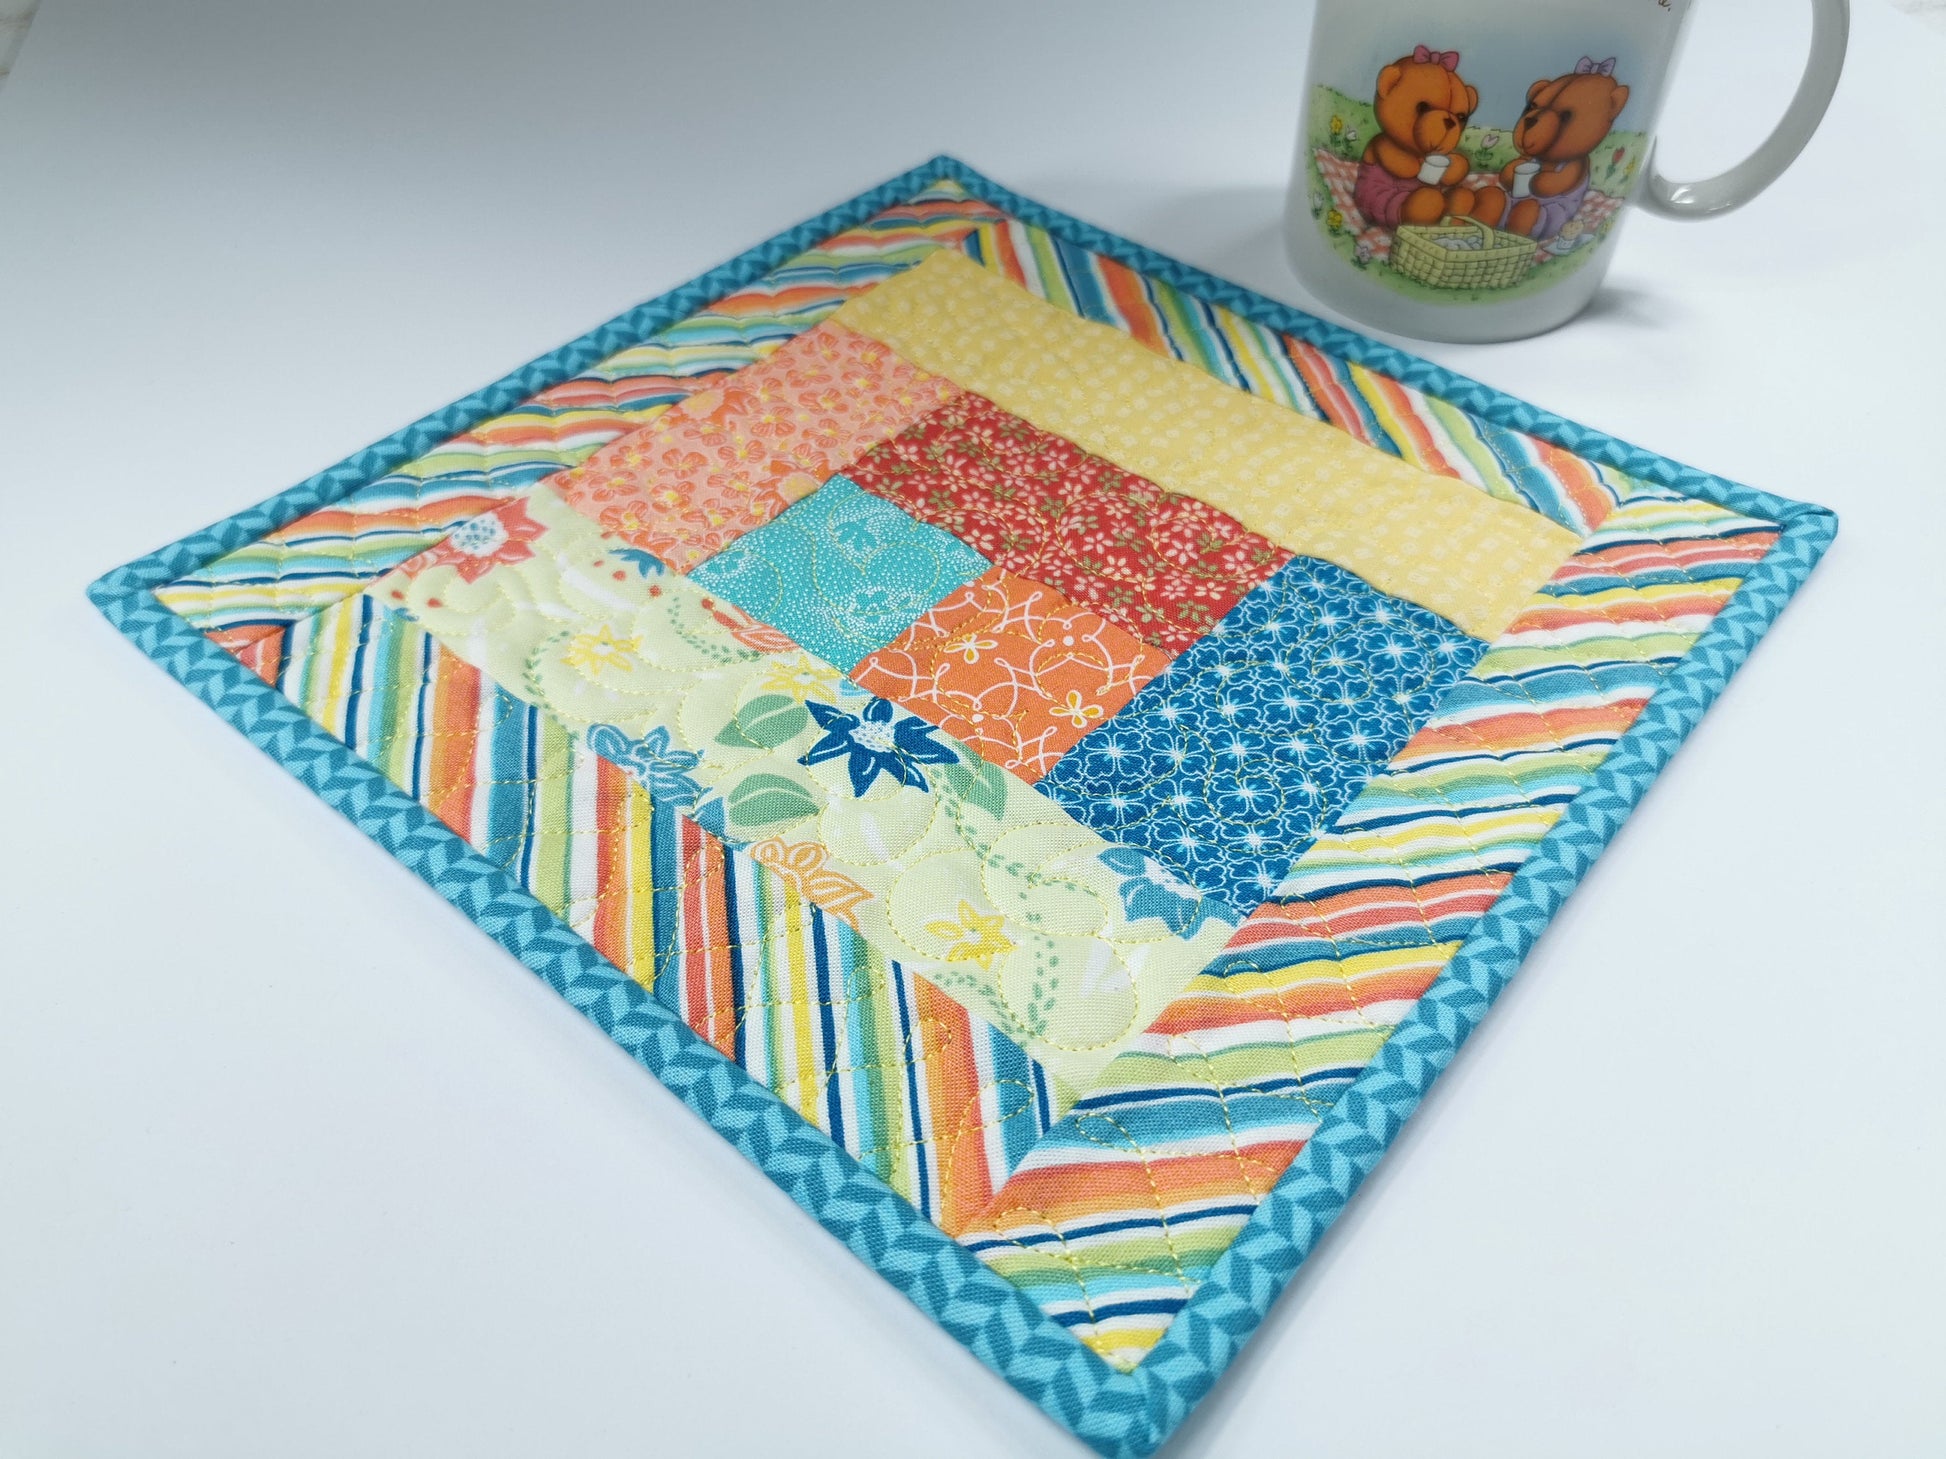 another view of the mug rug